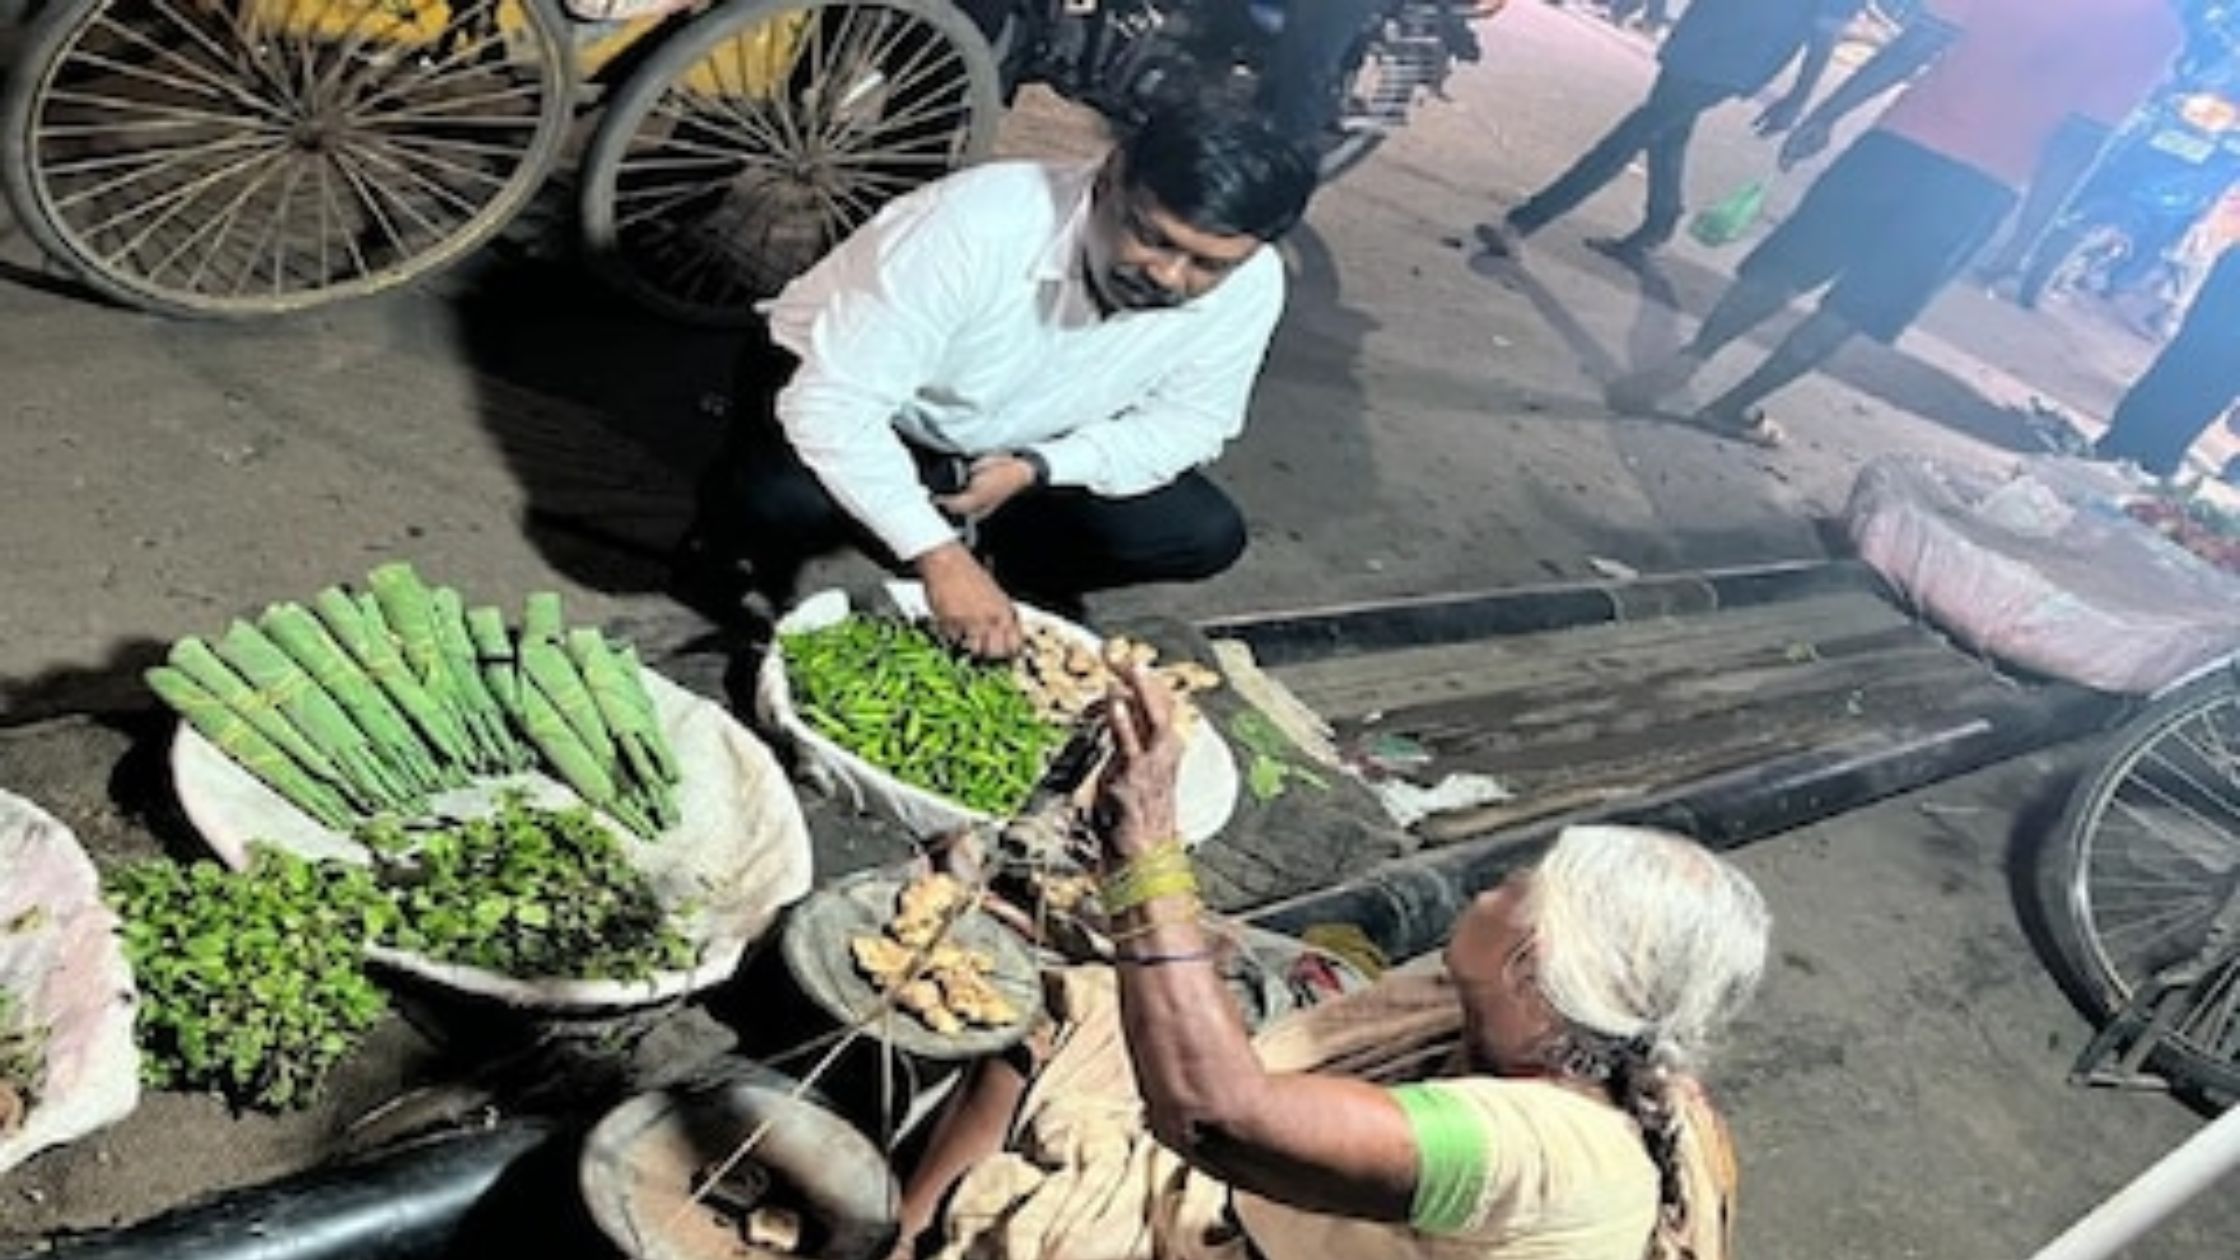 IAS officers were seen buying vegetables late at night